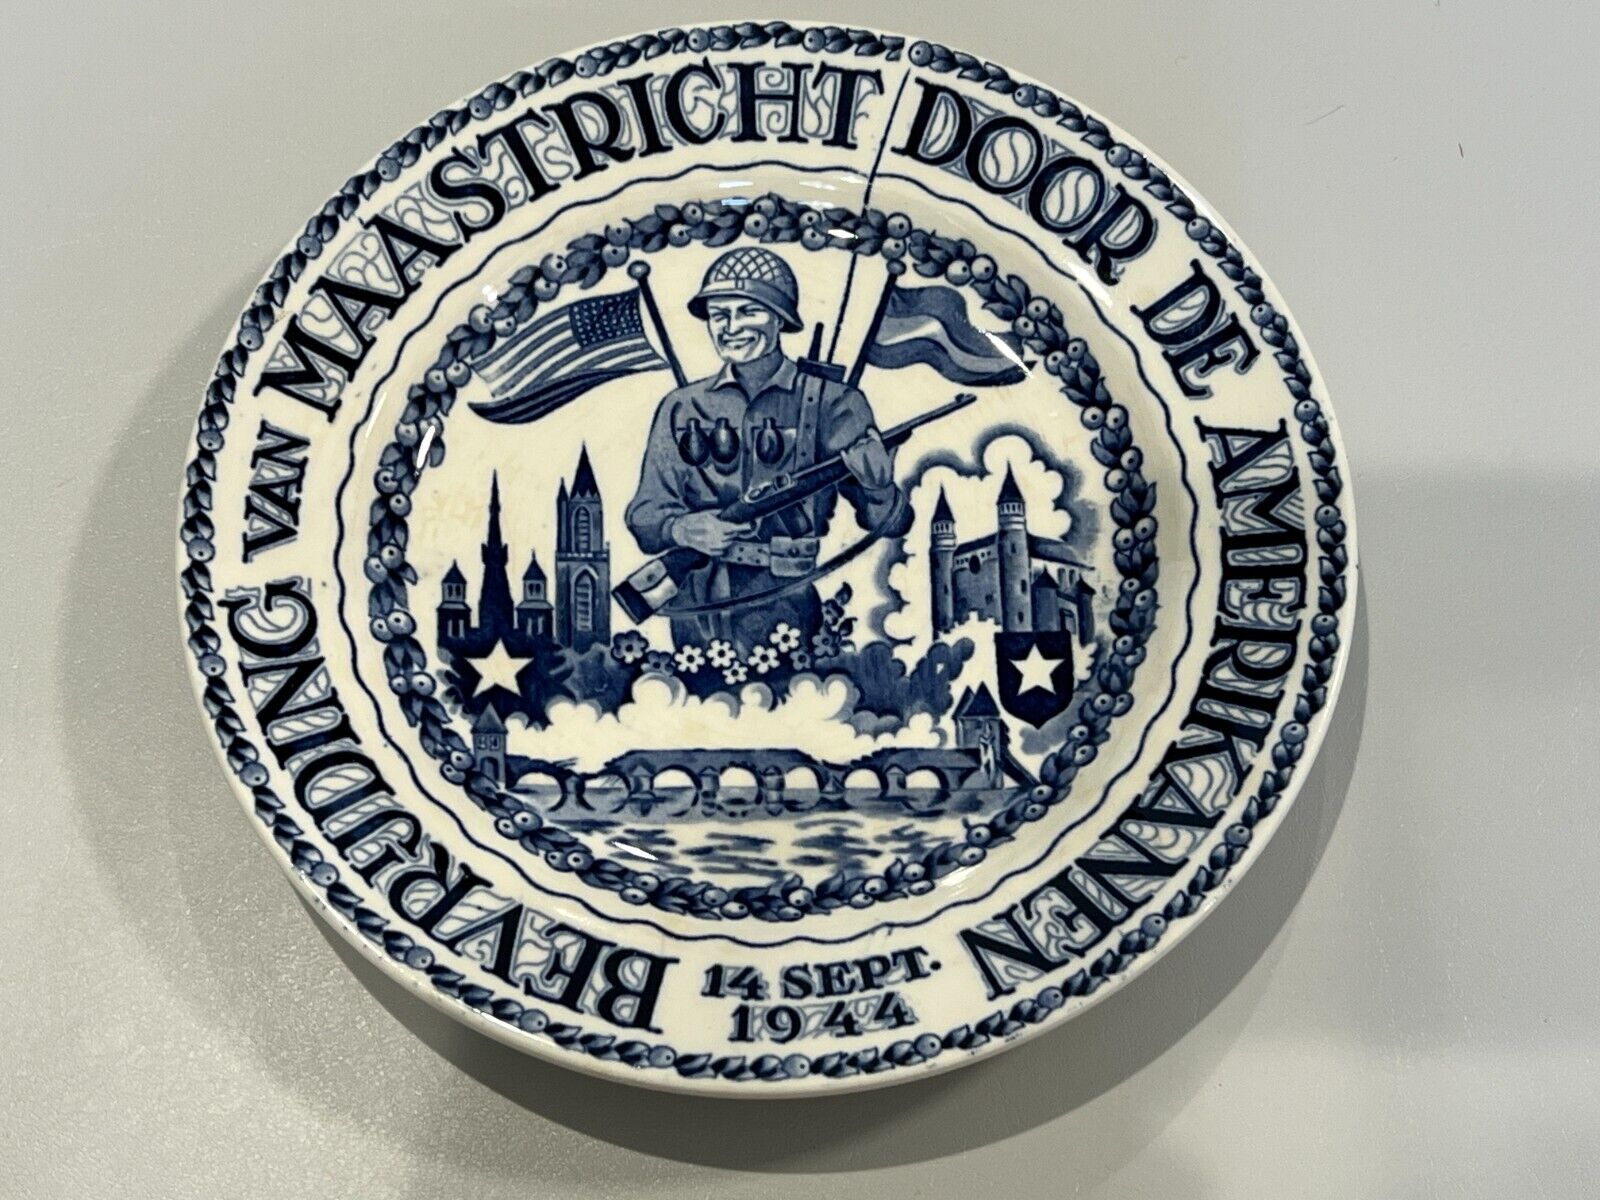 1944 Maastricht the First Liberated City of Holland Plate, 8